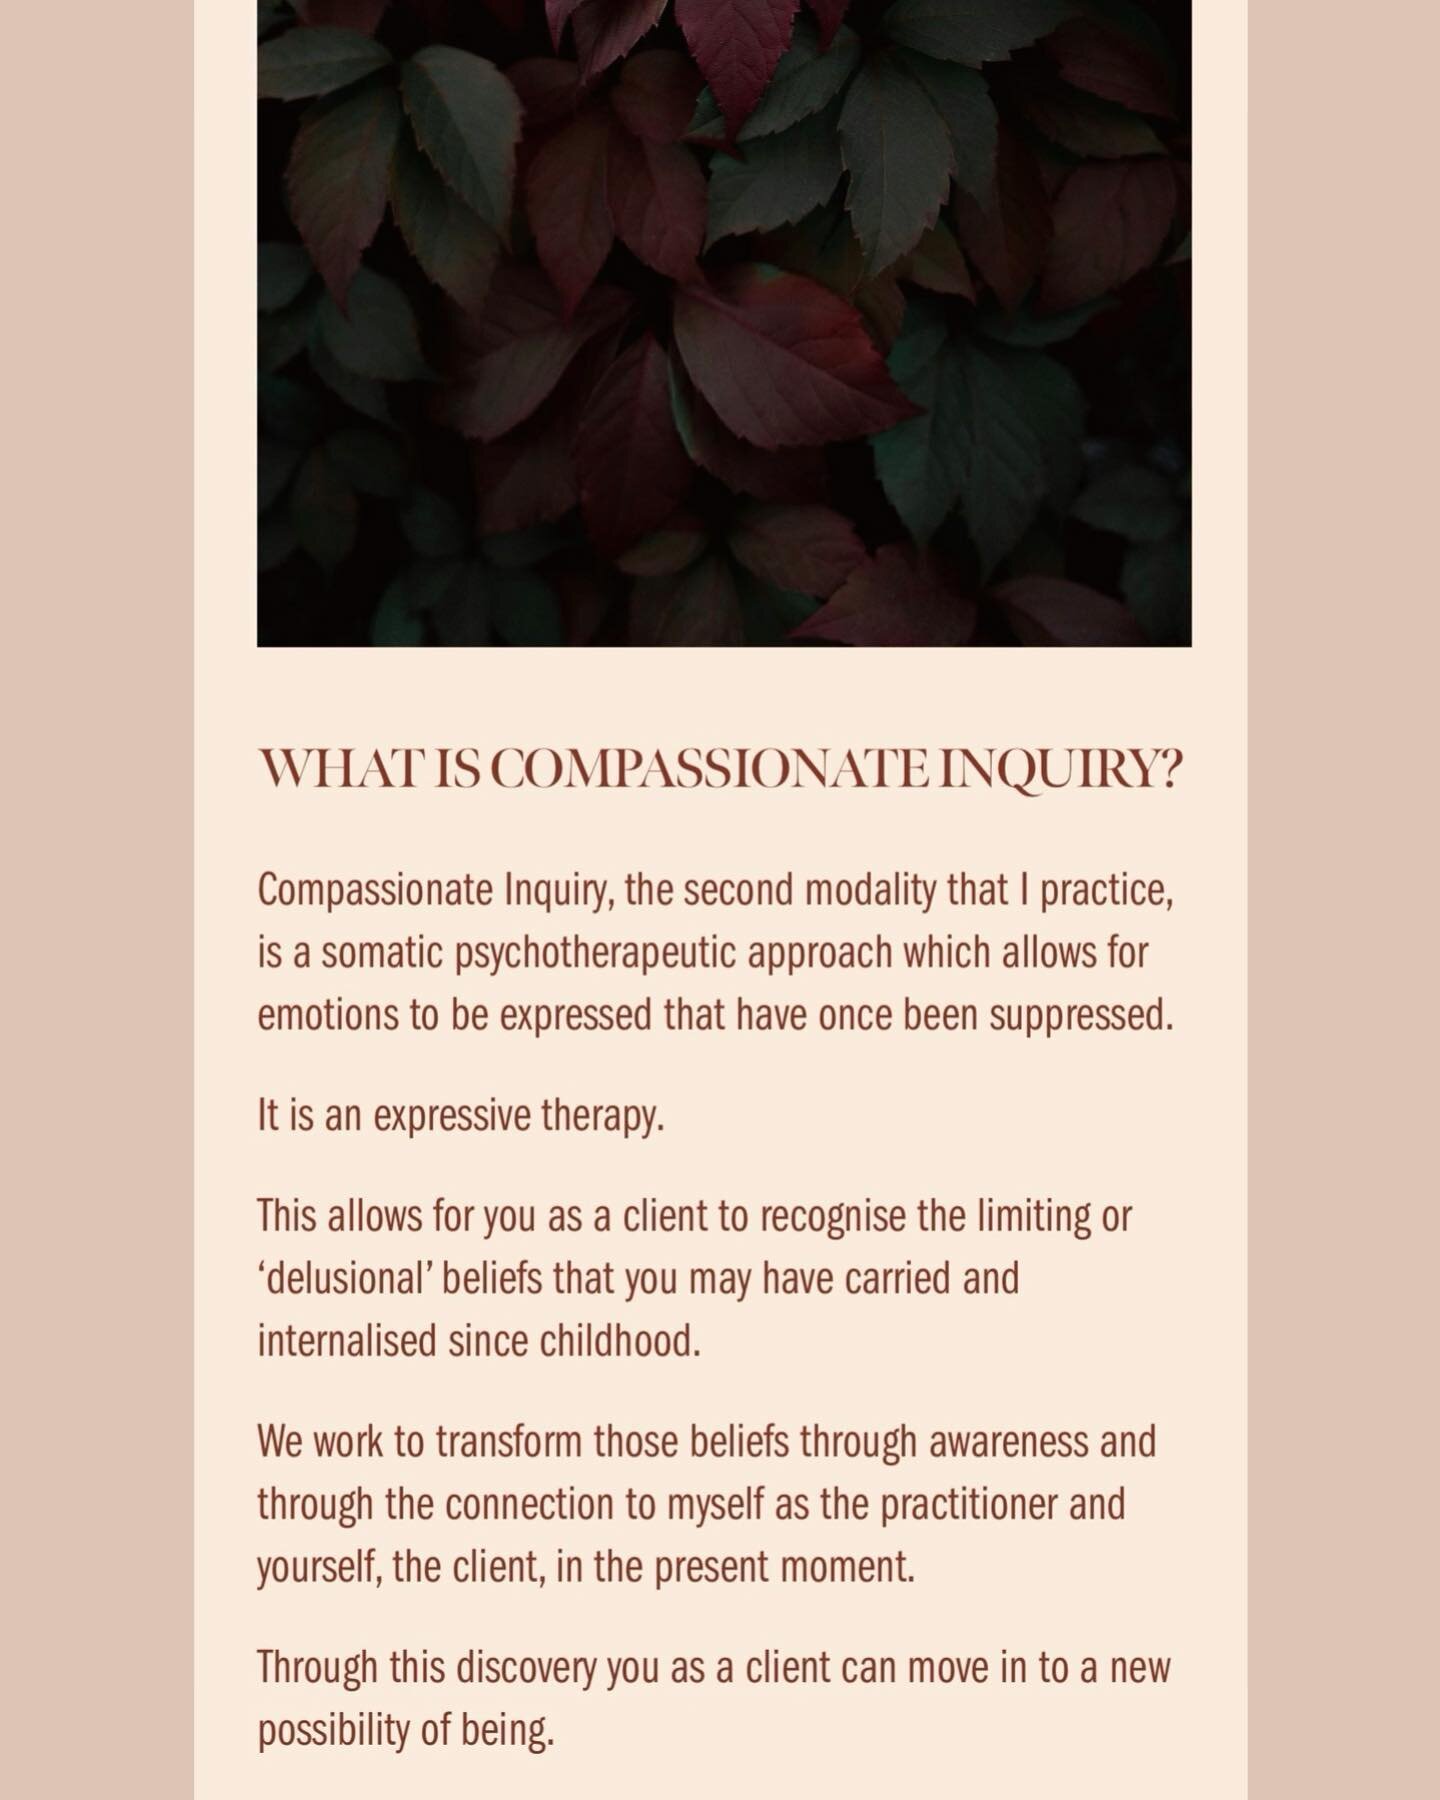 &diams;️ About Compassionate Inquiry from my website https://alisaeft.com/

I&rsquo;m taking on new clients at the moment using both EFT tapping and Compassionate Inquiry 💌 

📧 If you are curious, send me a DM for more information 💭

✨ 

#efttappi